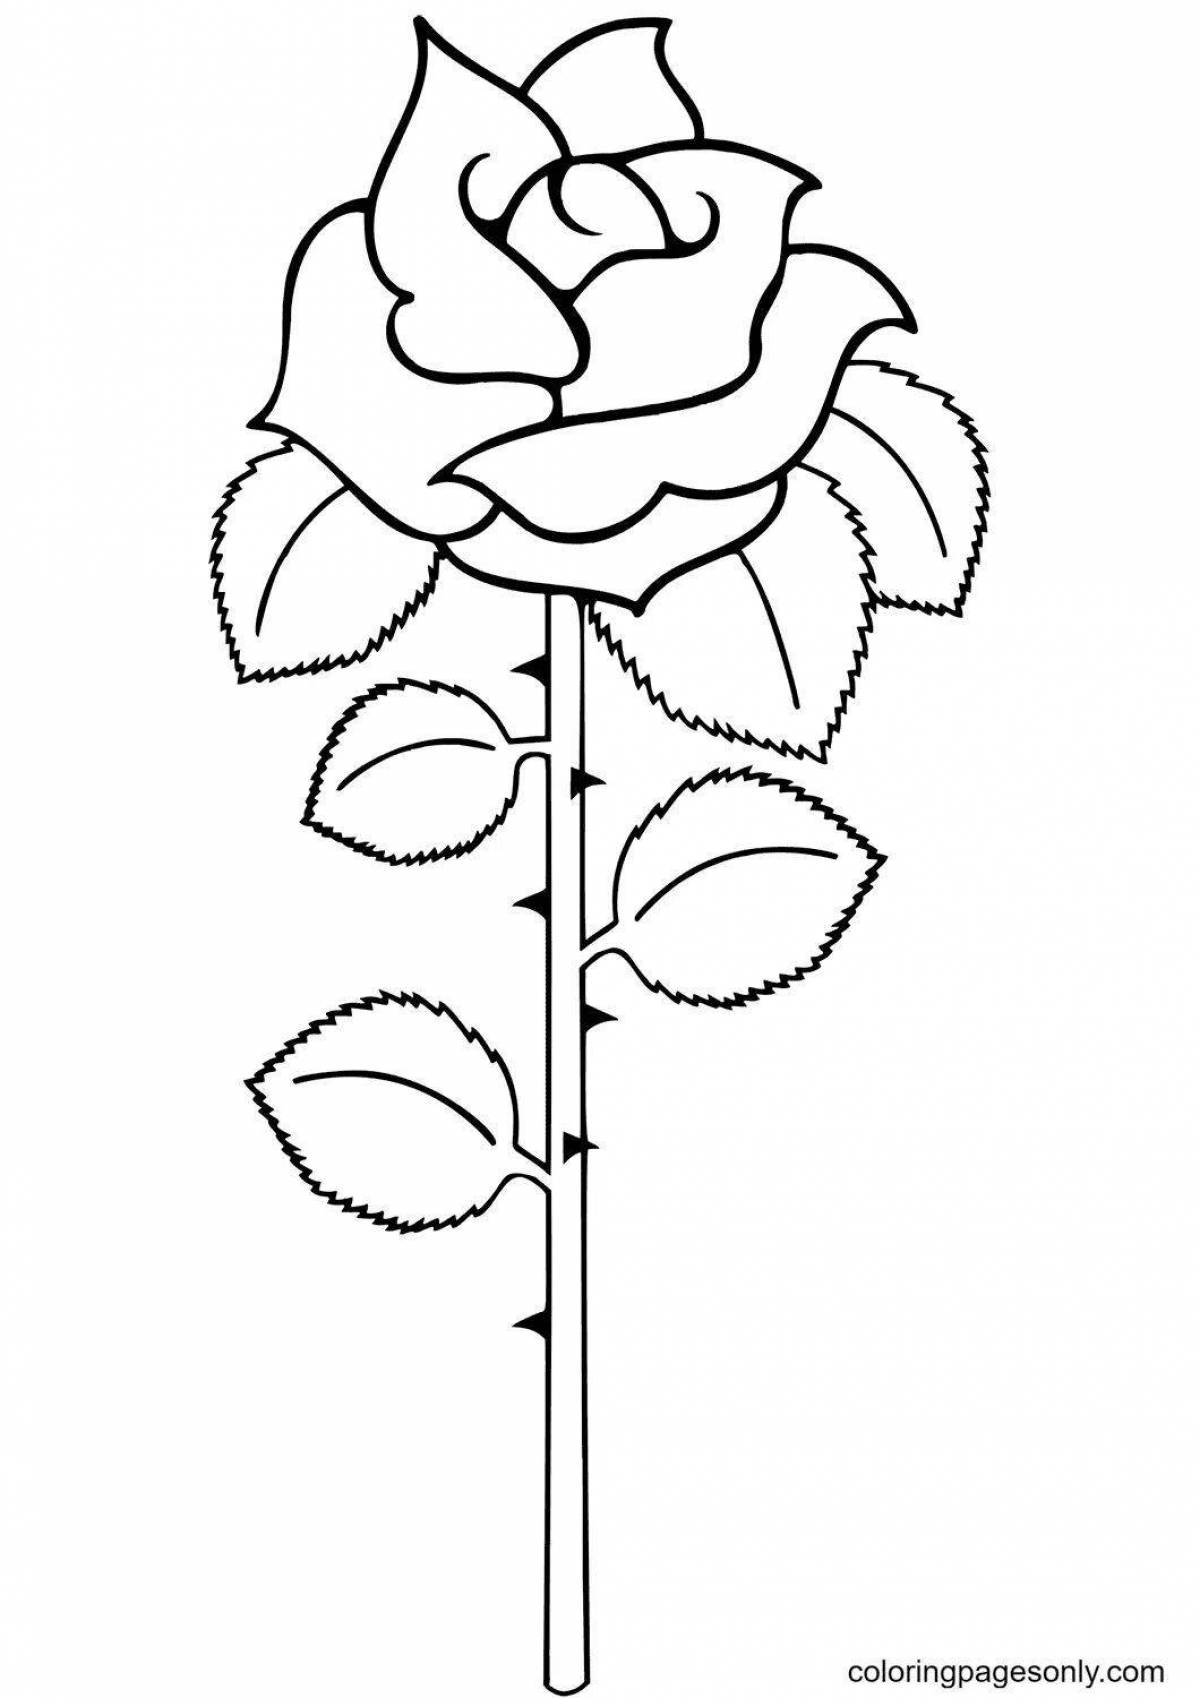 Playful rose coloring book for 5-6 year olds